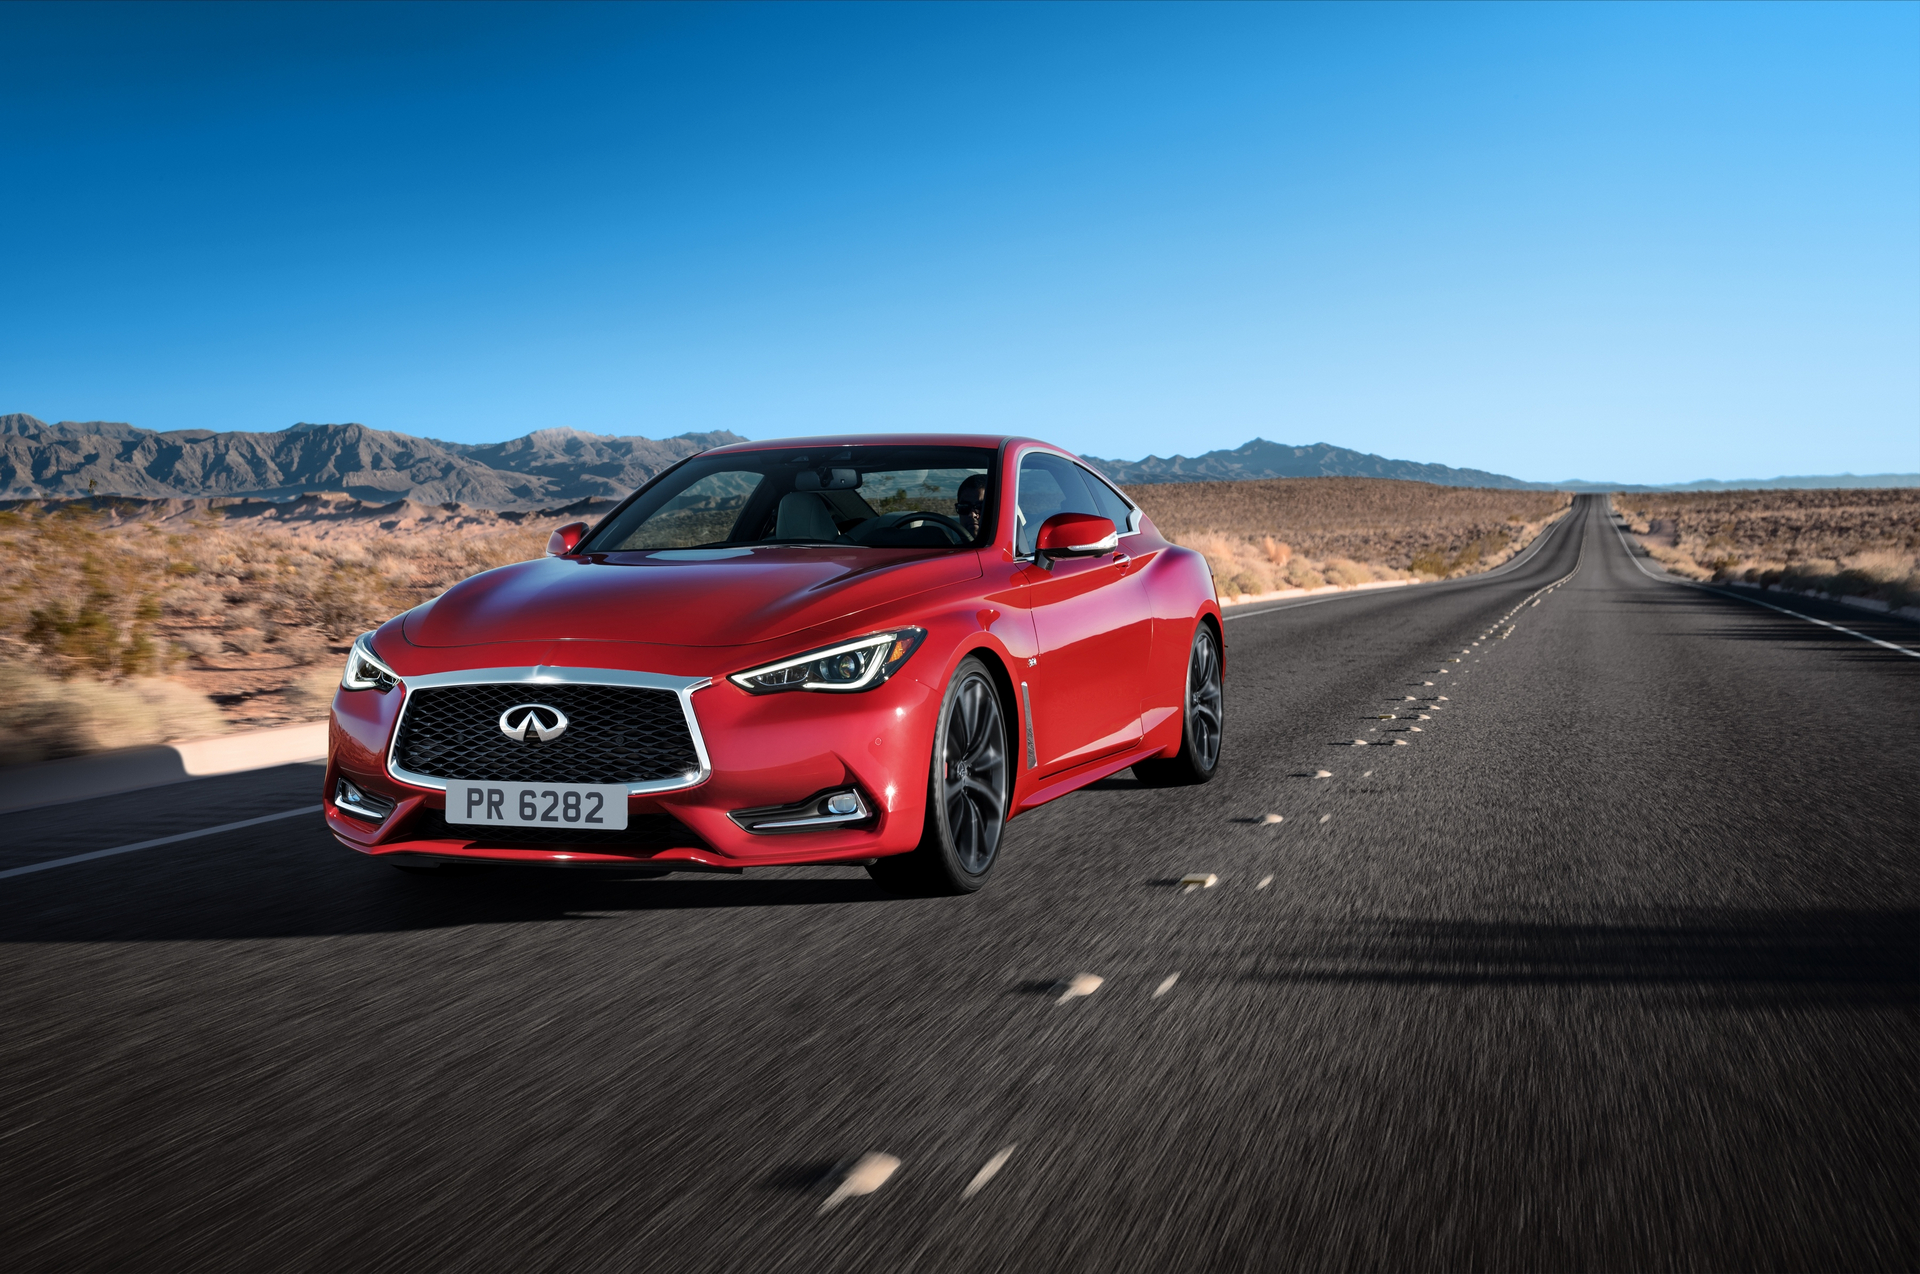 The all-new 2017 INFINITI Q60, a style leader since its original inception, offers a compelling combination of daring design and exhilarating performance and dynamics. The third-generation of INFINITI’s renowned sports coupe is offered in a range of two-wheel and all-wheel drive configurations and powerplants – including the 3.0-liter V6 twin-turbo that it shares with the popular INFINITI Q50 sports sedan © Nissan Motor Co., Ltd.